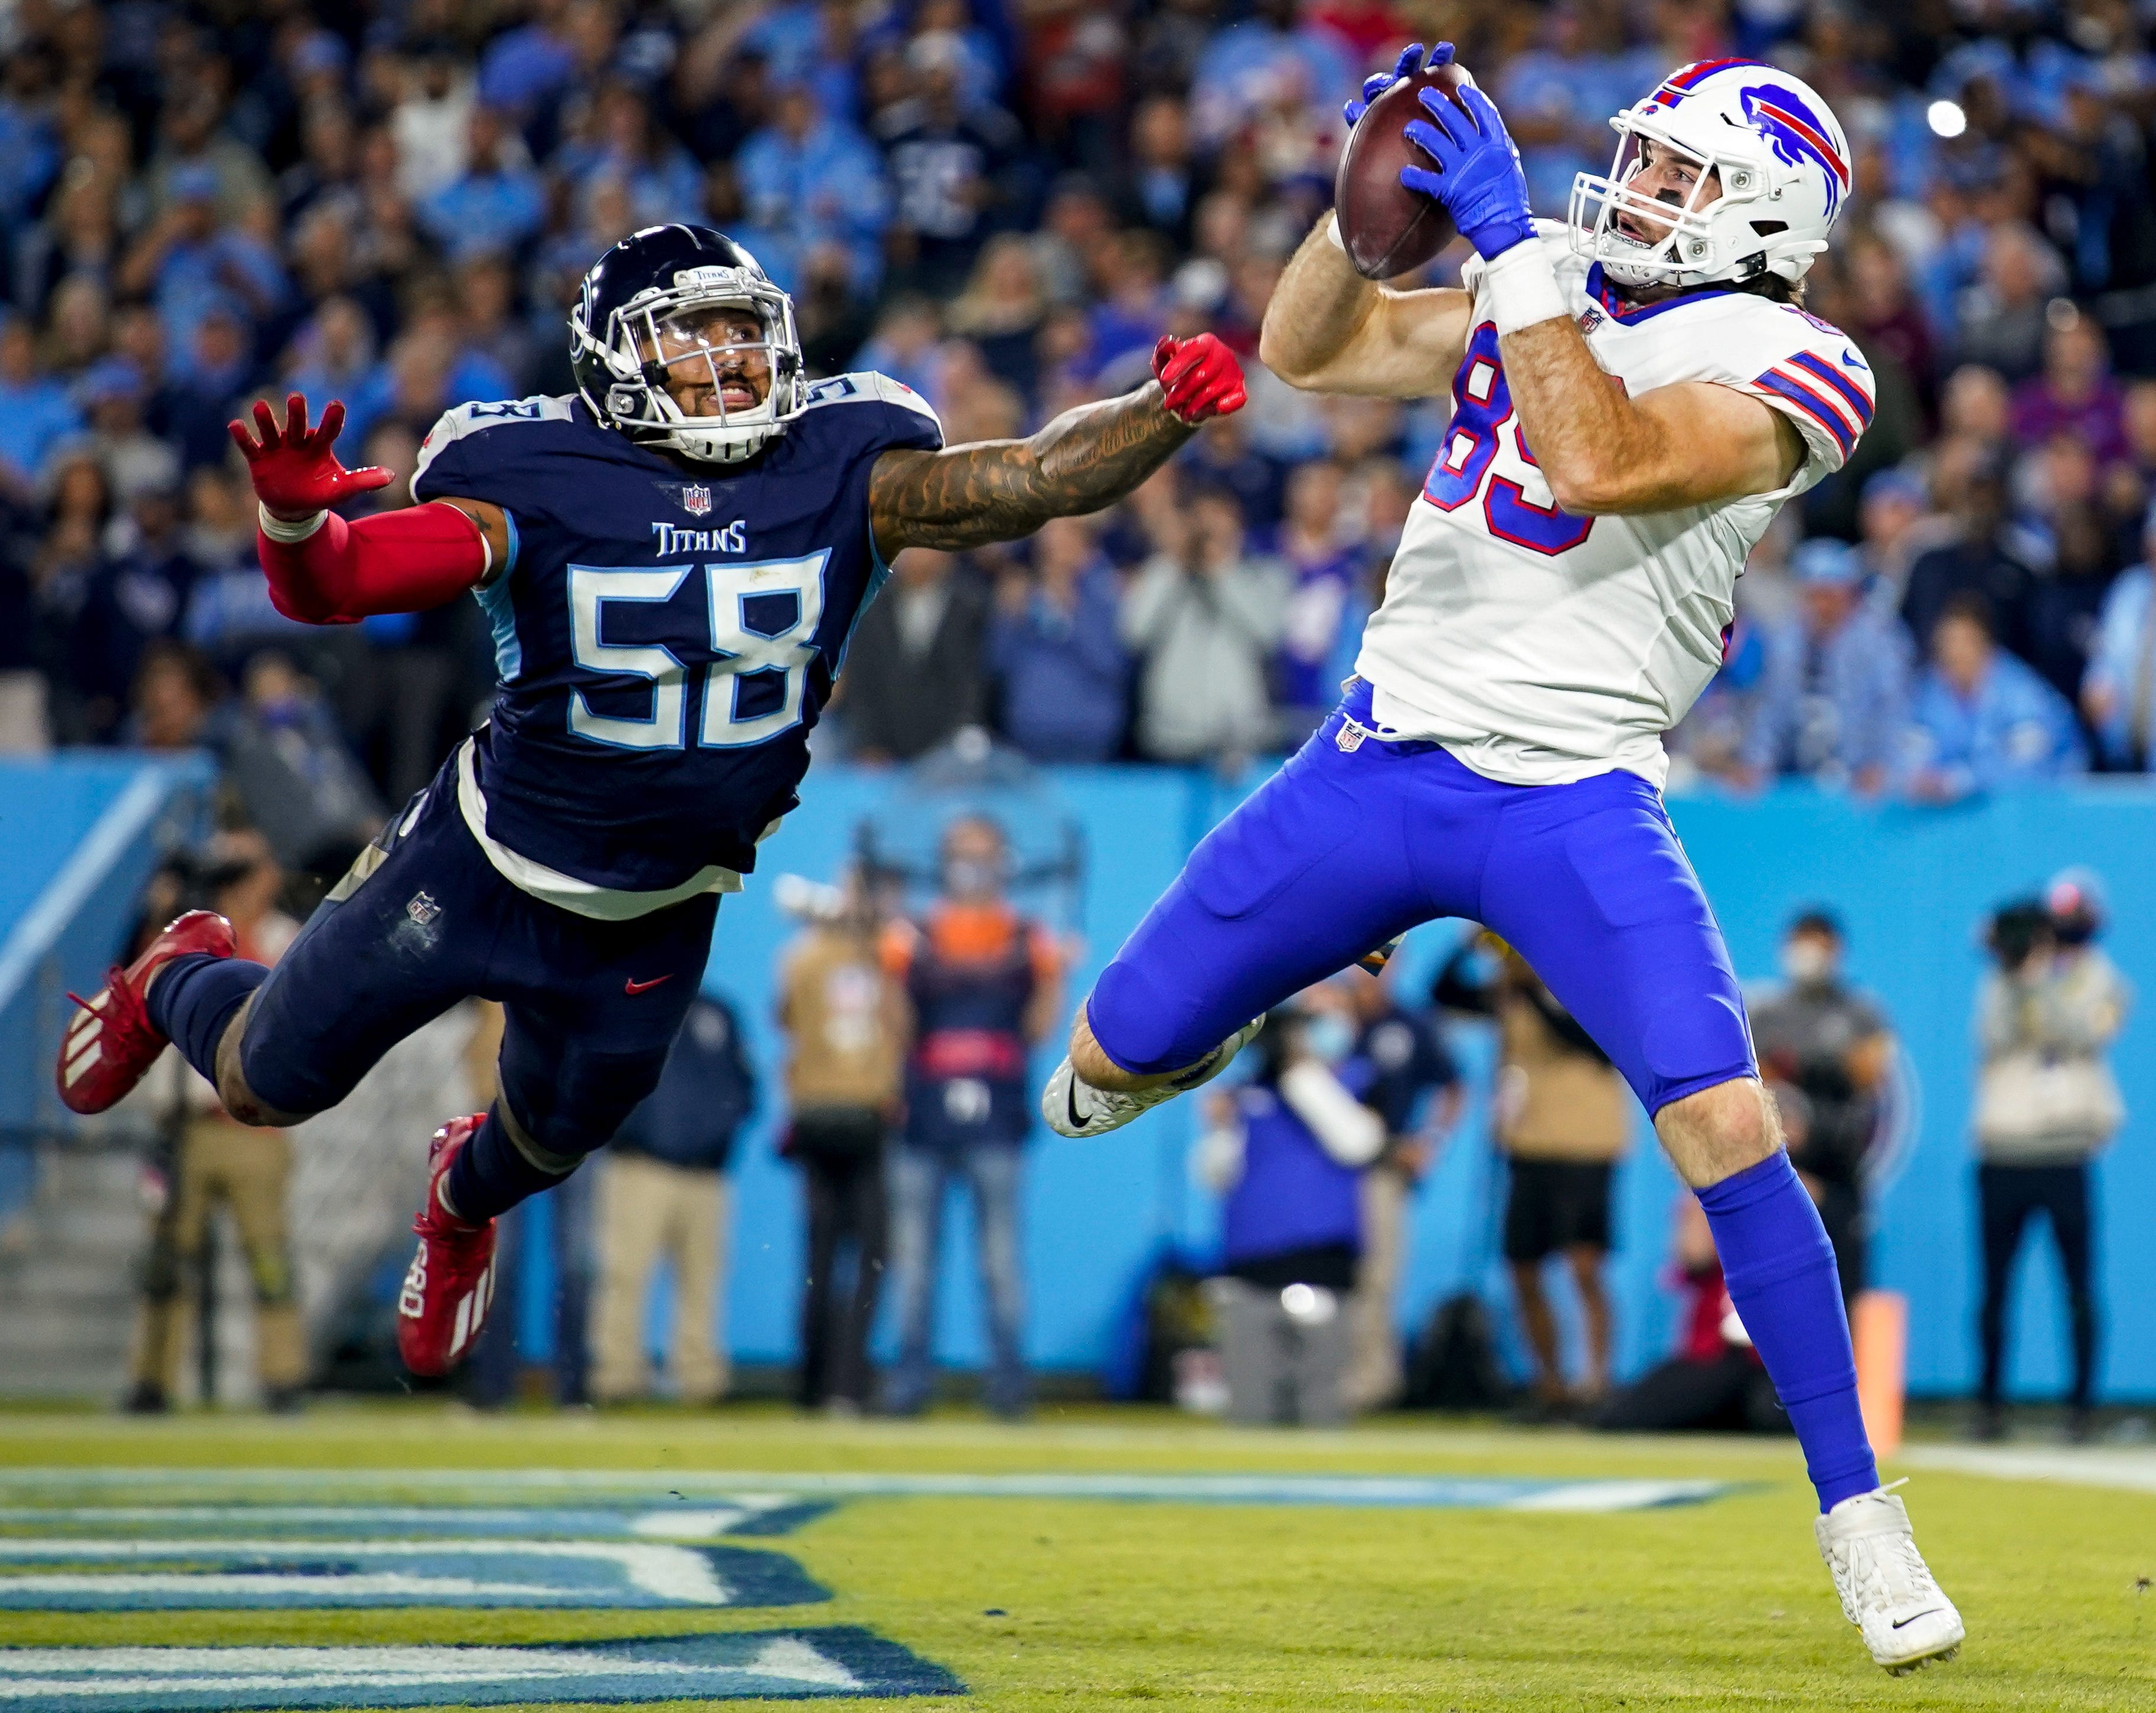 Buffalo Bills tight end Tommy Sweeney (89) scores a touchdown past Tennessee Titans linebacker Harold Landry III (58) during the third quarter at Nissan Stadium in Nashville, Tenn., Monday, Oct. 18, 2021. Nelles Poy